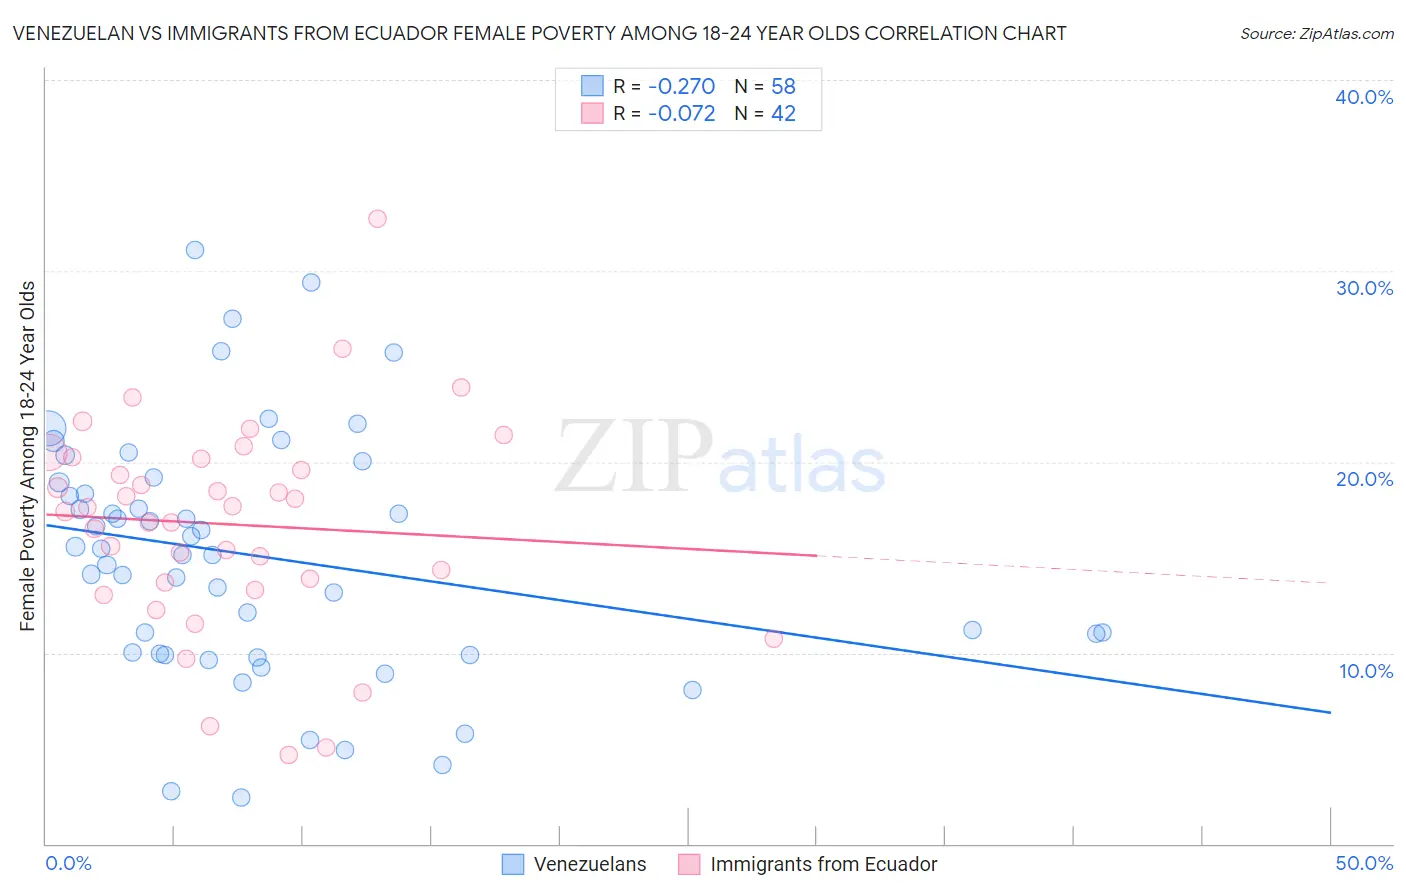 Venezuelan vs Immigrants from Ecuador Female Poverty Among 18-24 Year Olds